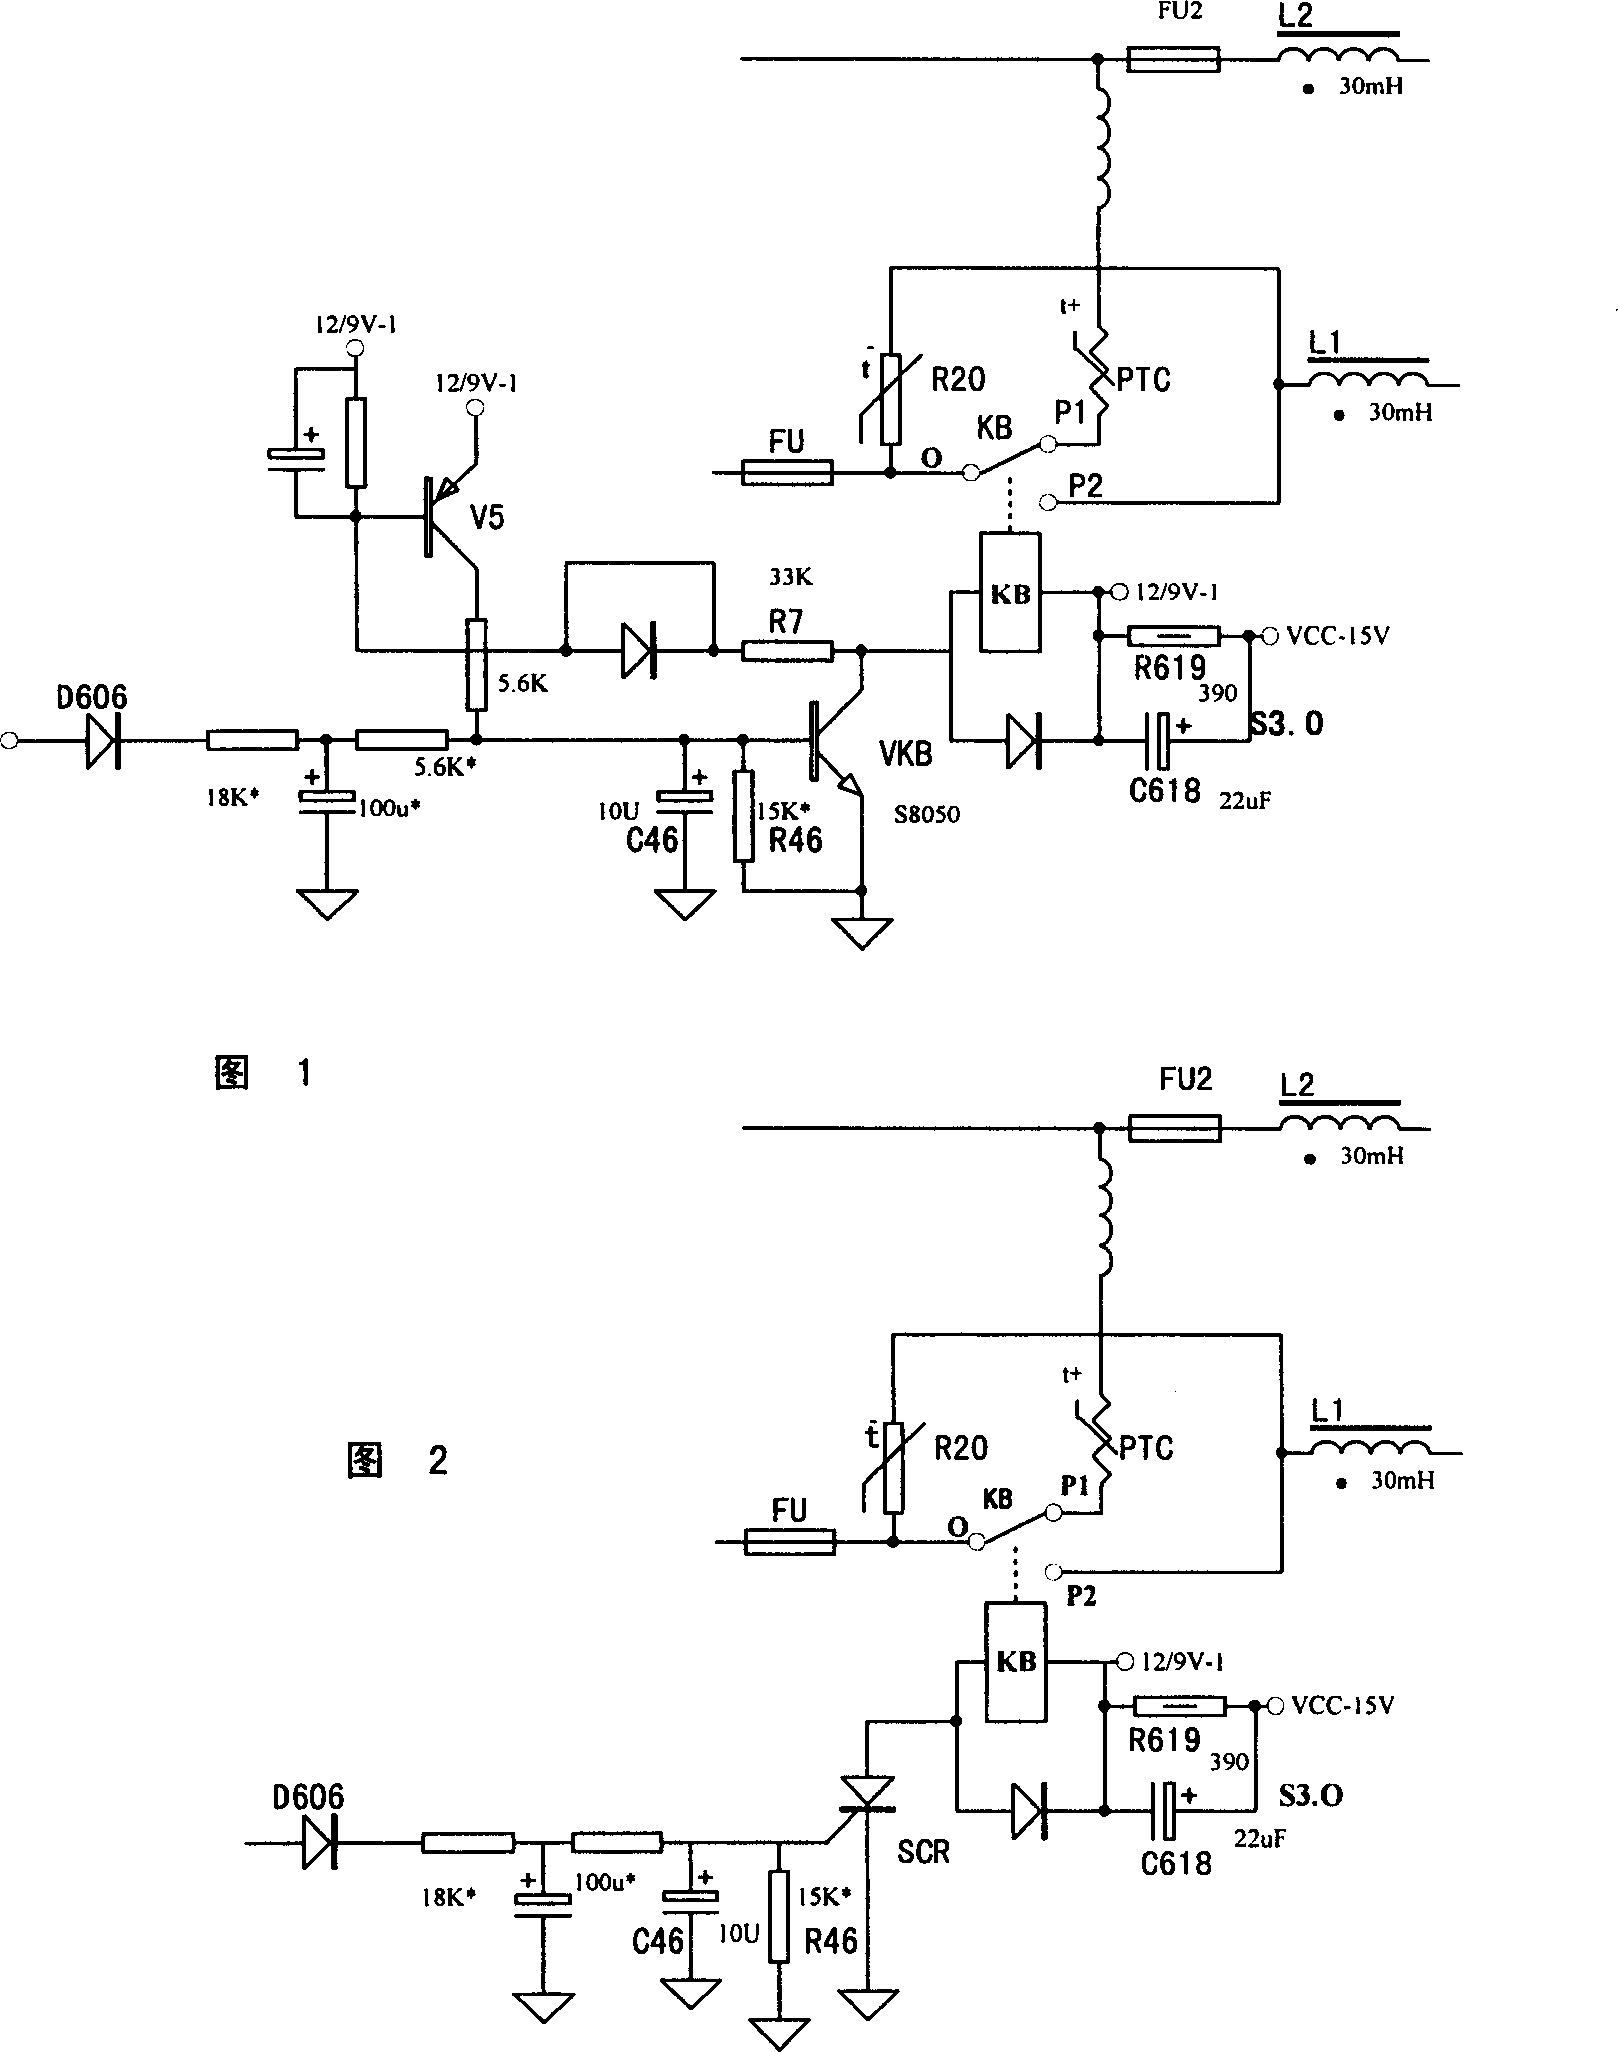 Device for demagnetizing clor TV set through automatic switchover and preventing overcurrent impulsion when turning on TV set